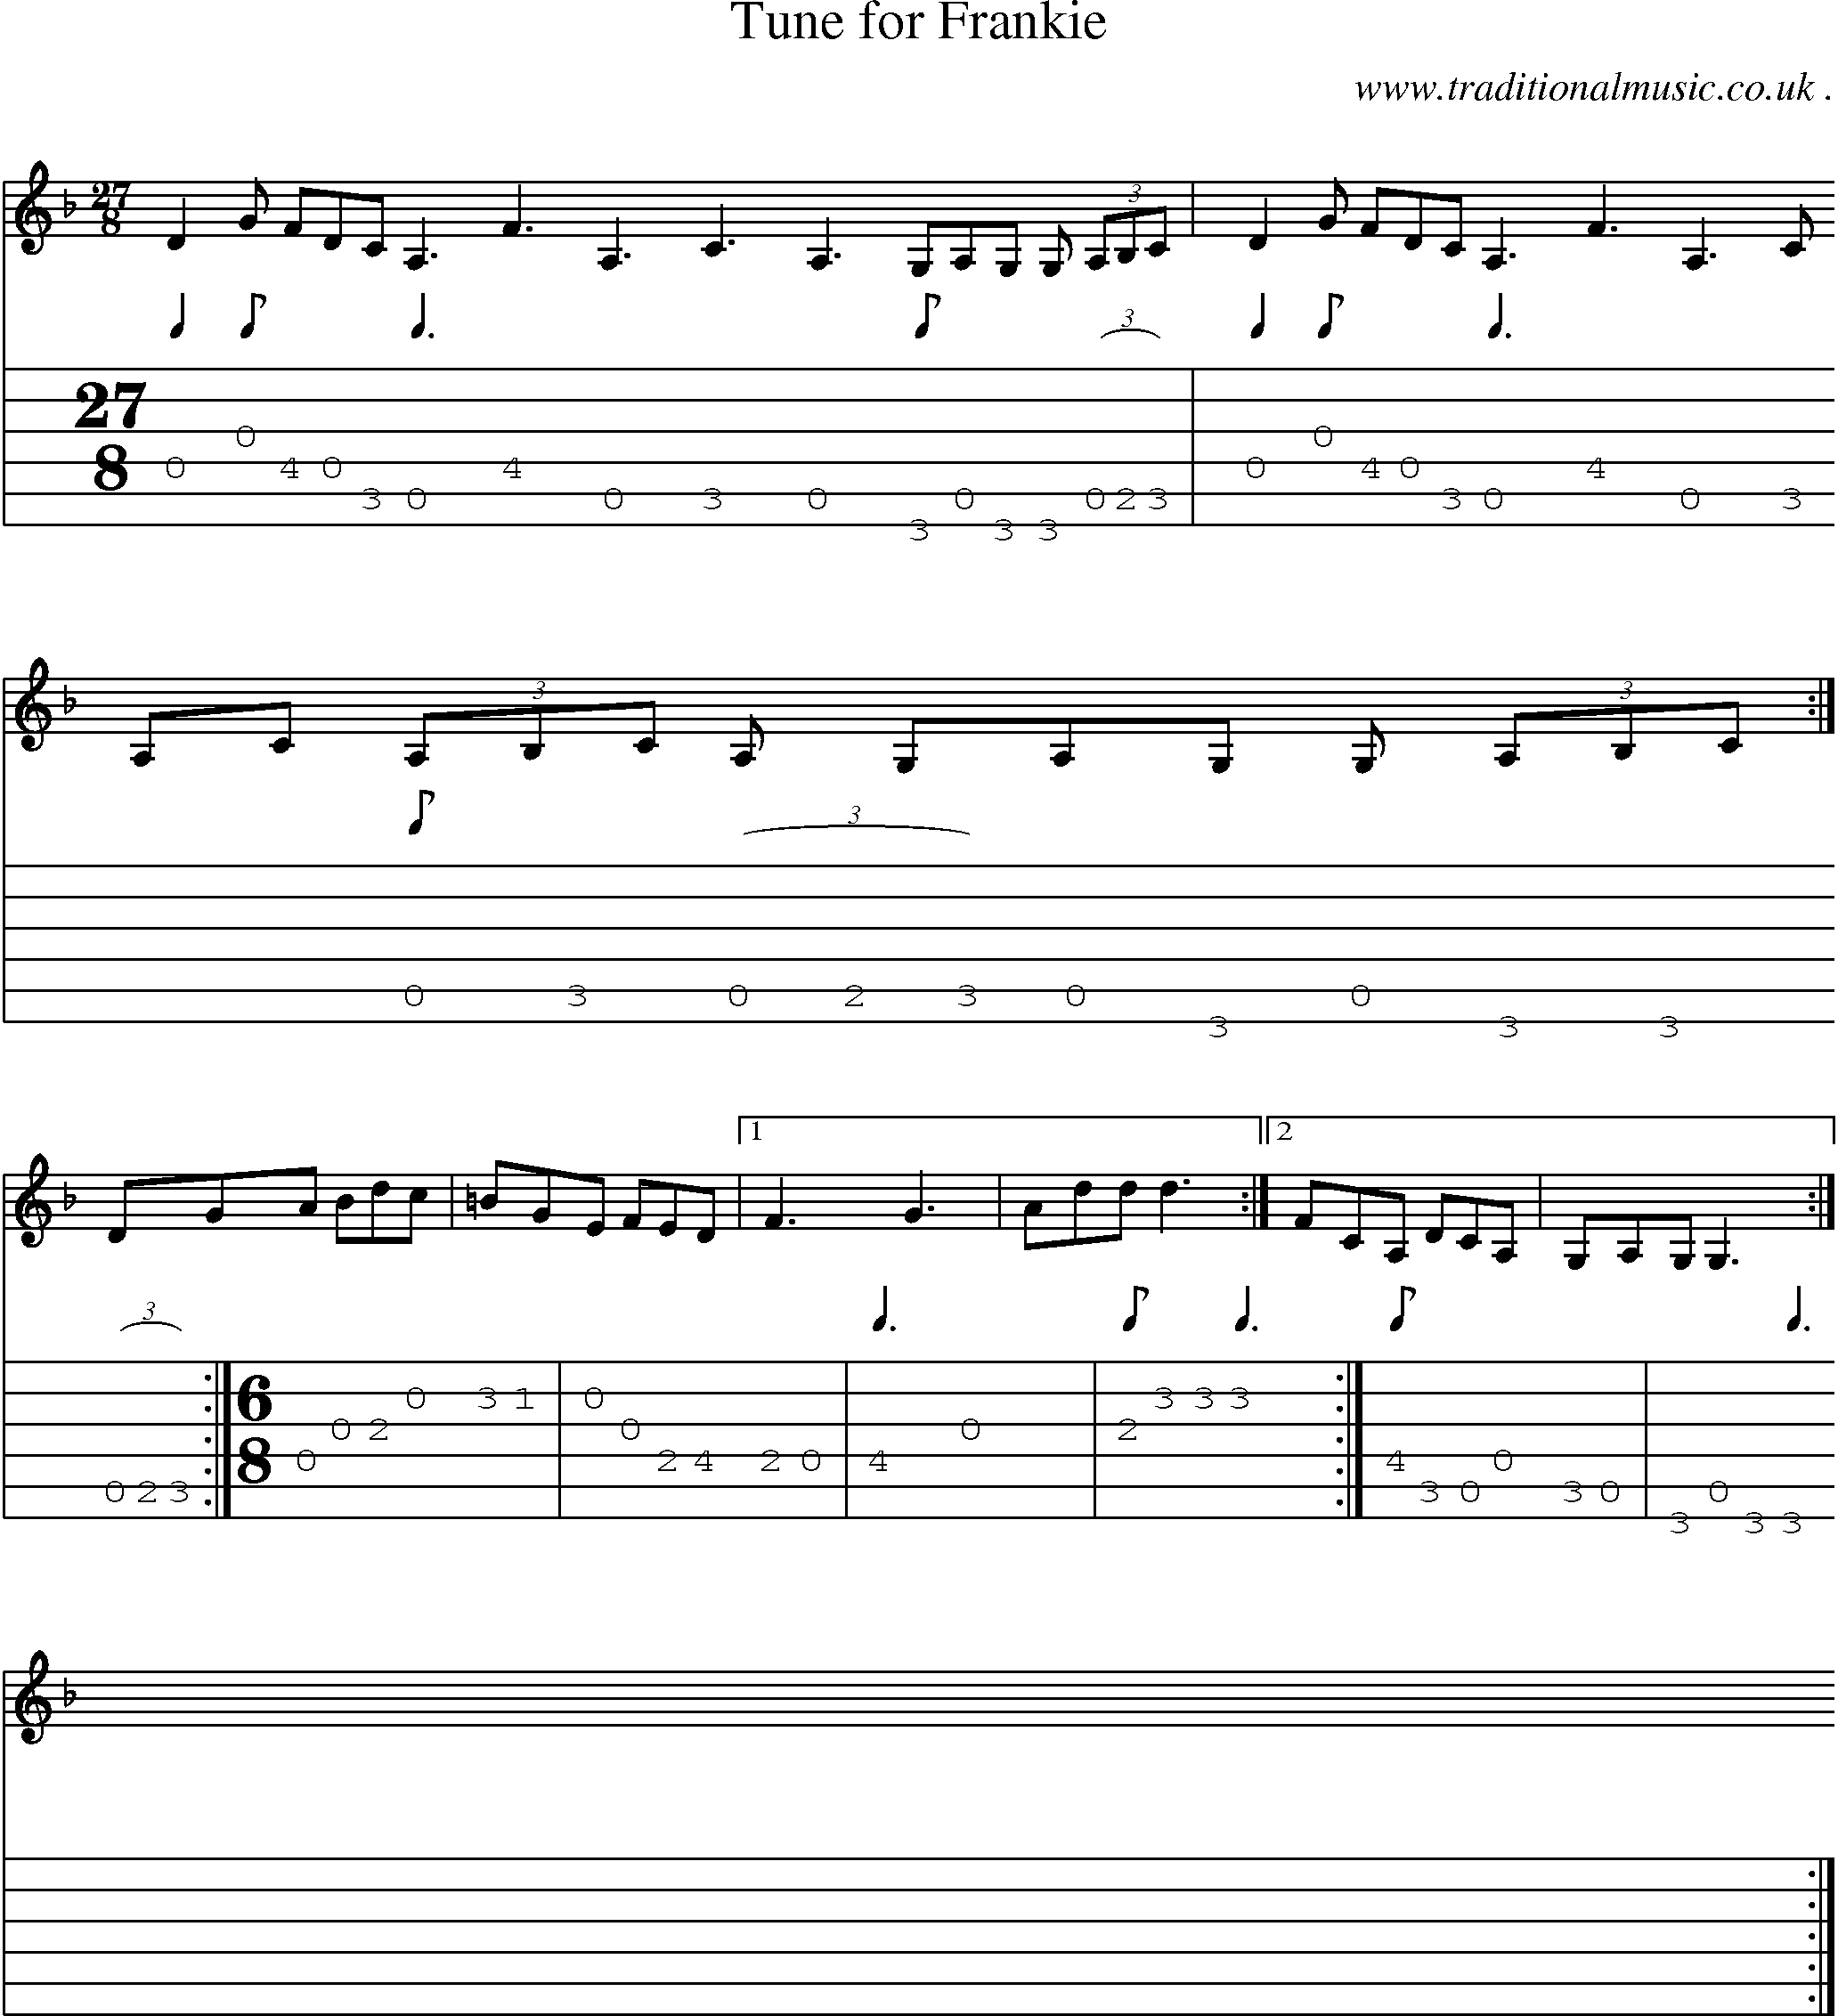 Sheet-Music and Guitar Tabs for Tune For Frankie